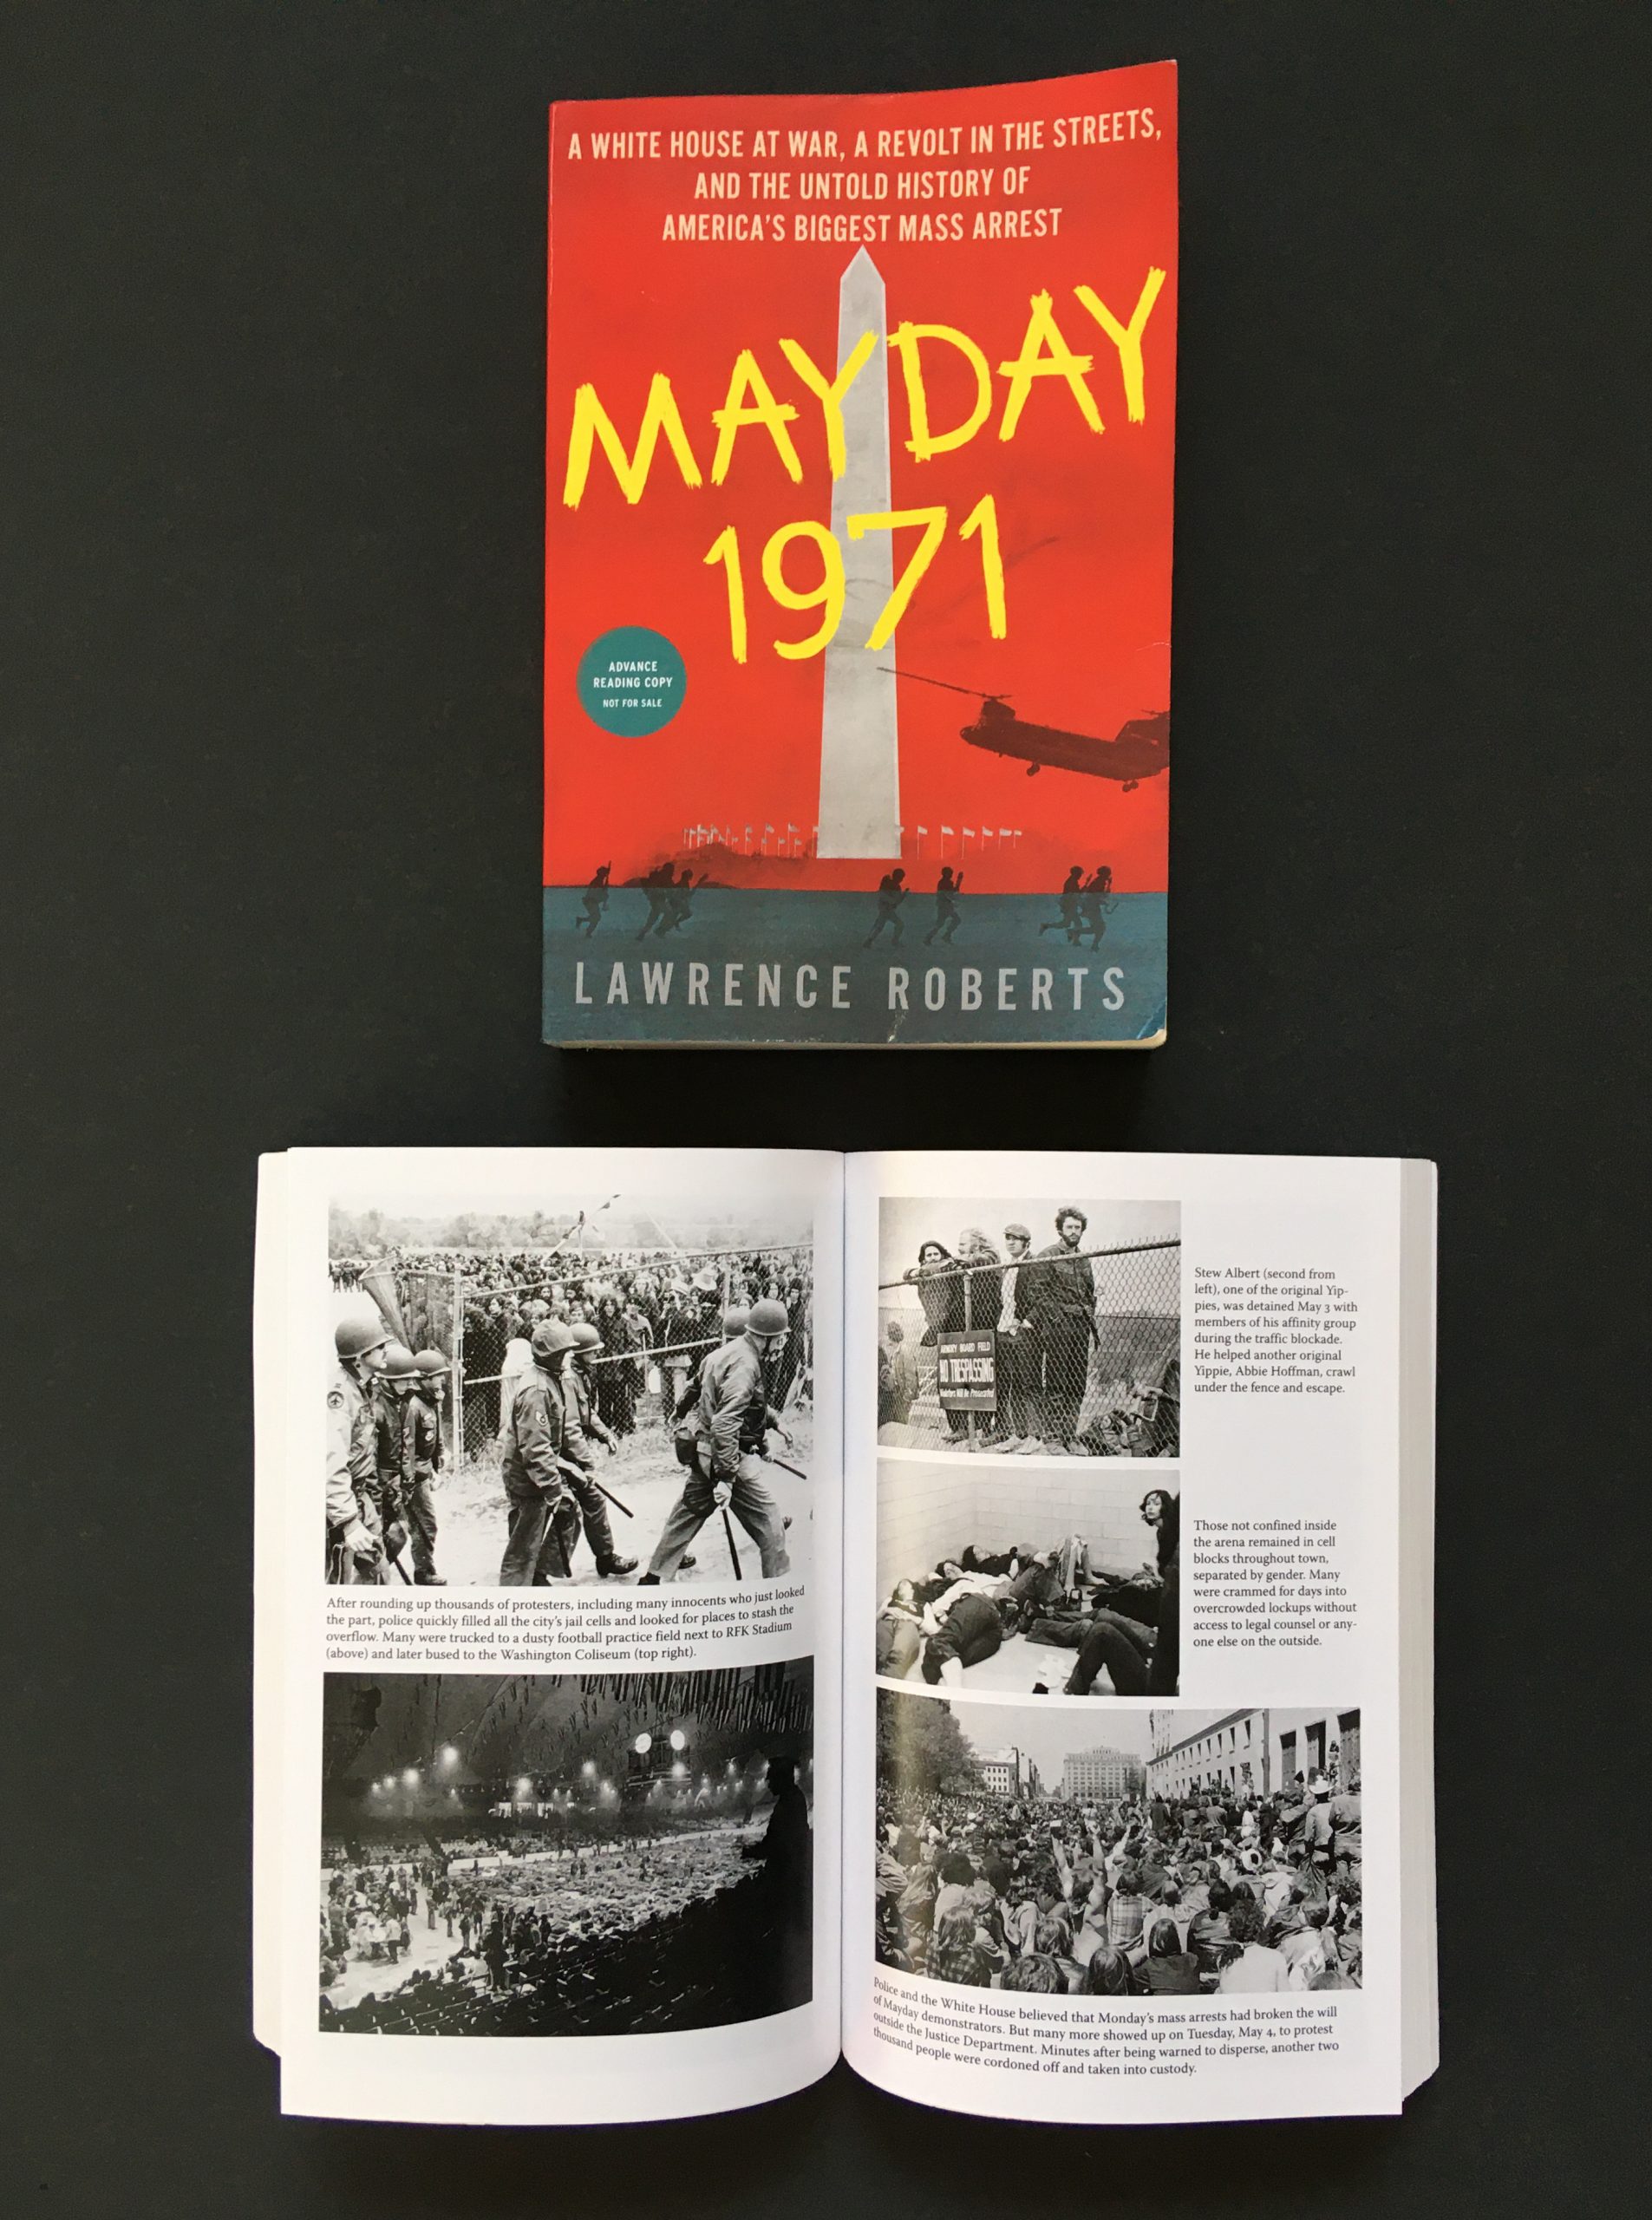 Mayday 1971 by Lawrence Roberts